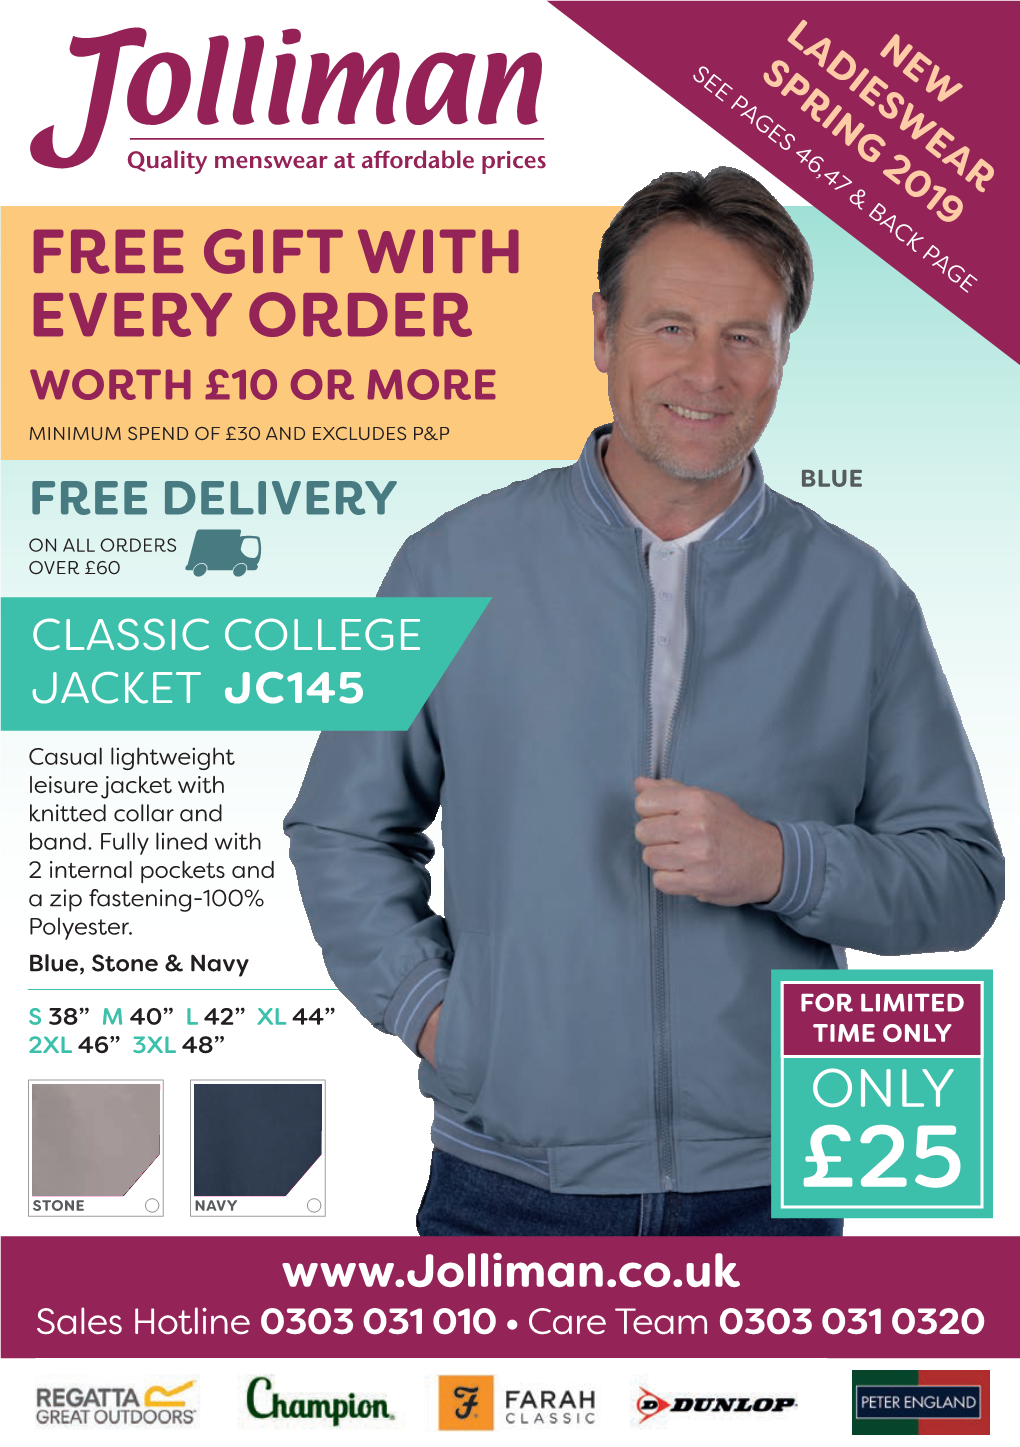 Free Gift with Every Order Worth £10 Or More Minimum Spend of £30 and Excludes P&P Free Delivery Blue on All Orders Over £60 Classic College Jacket Jc145